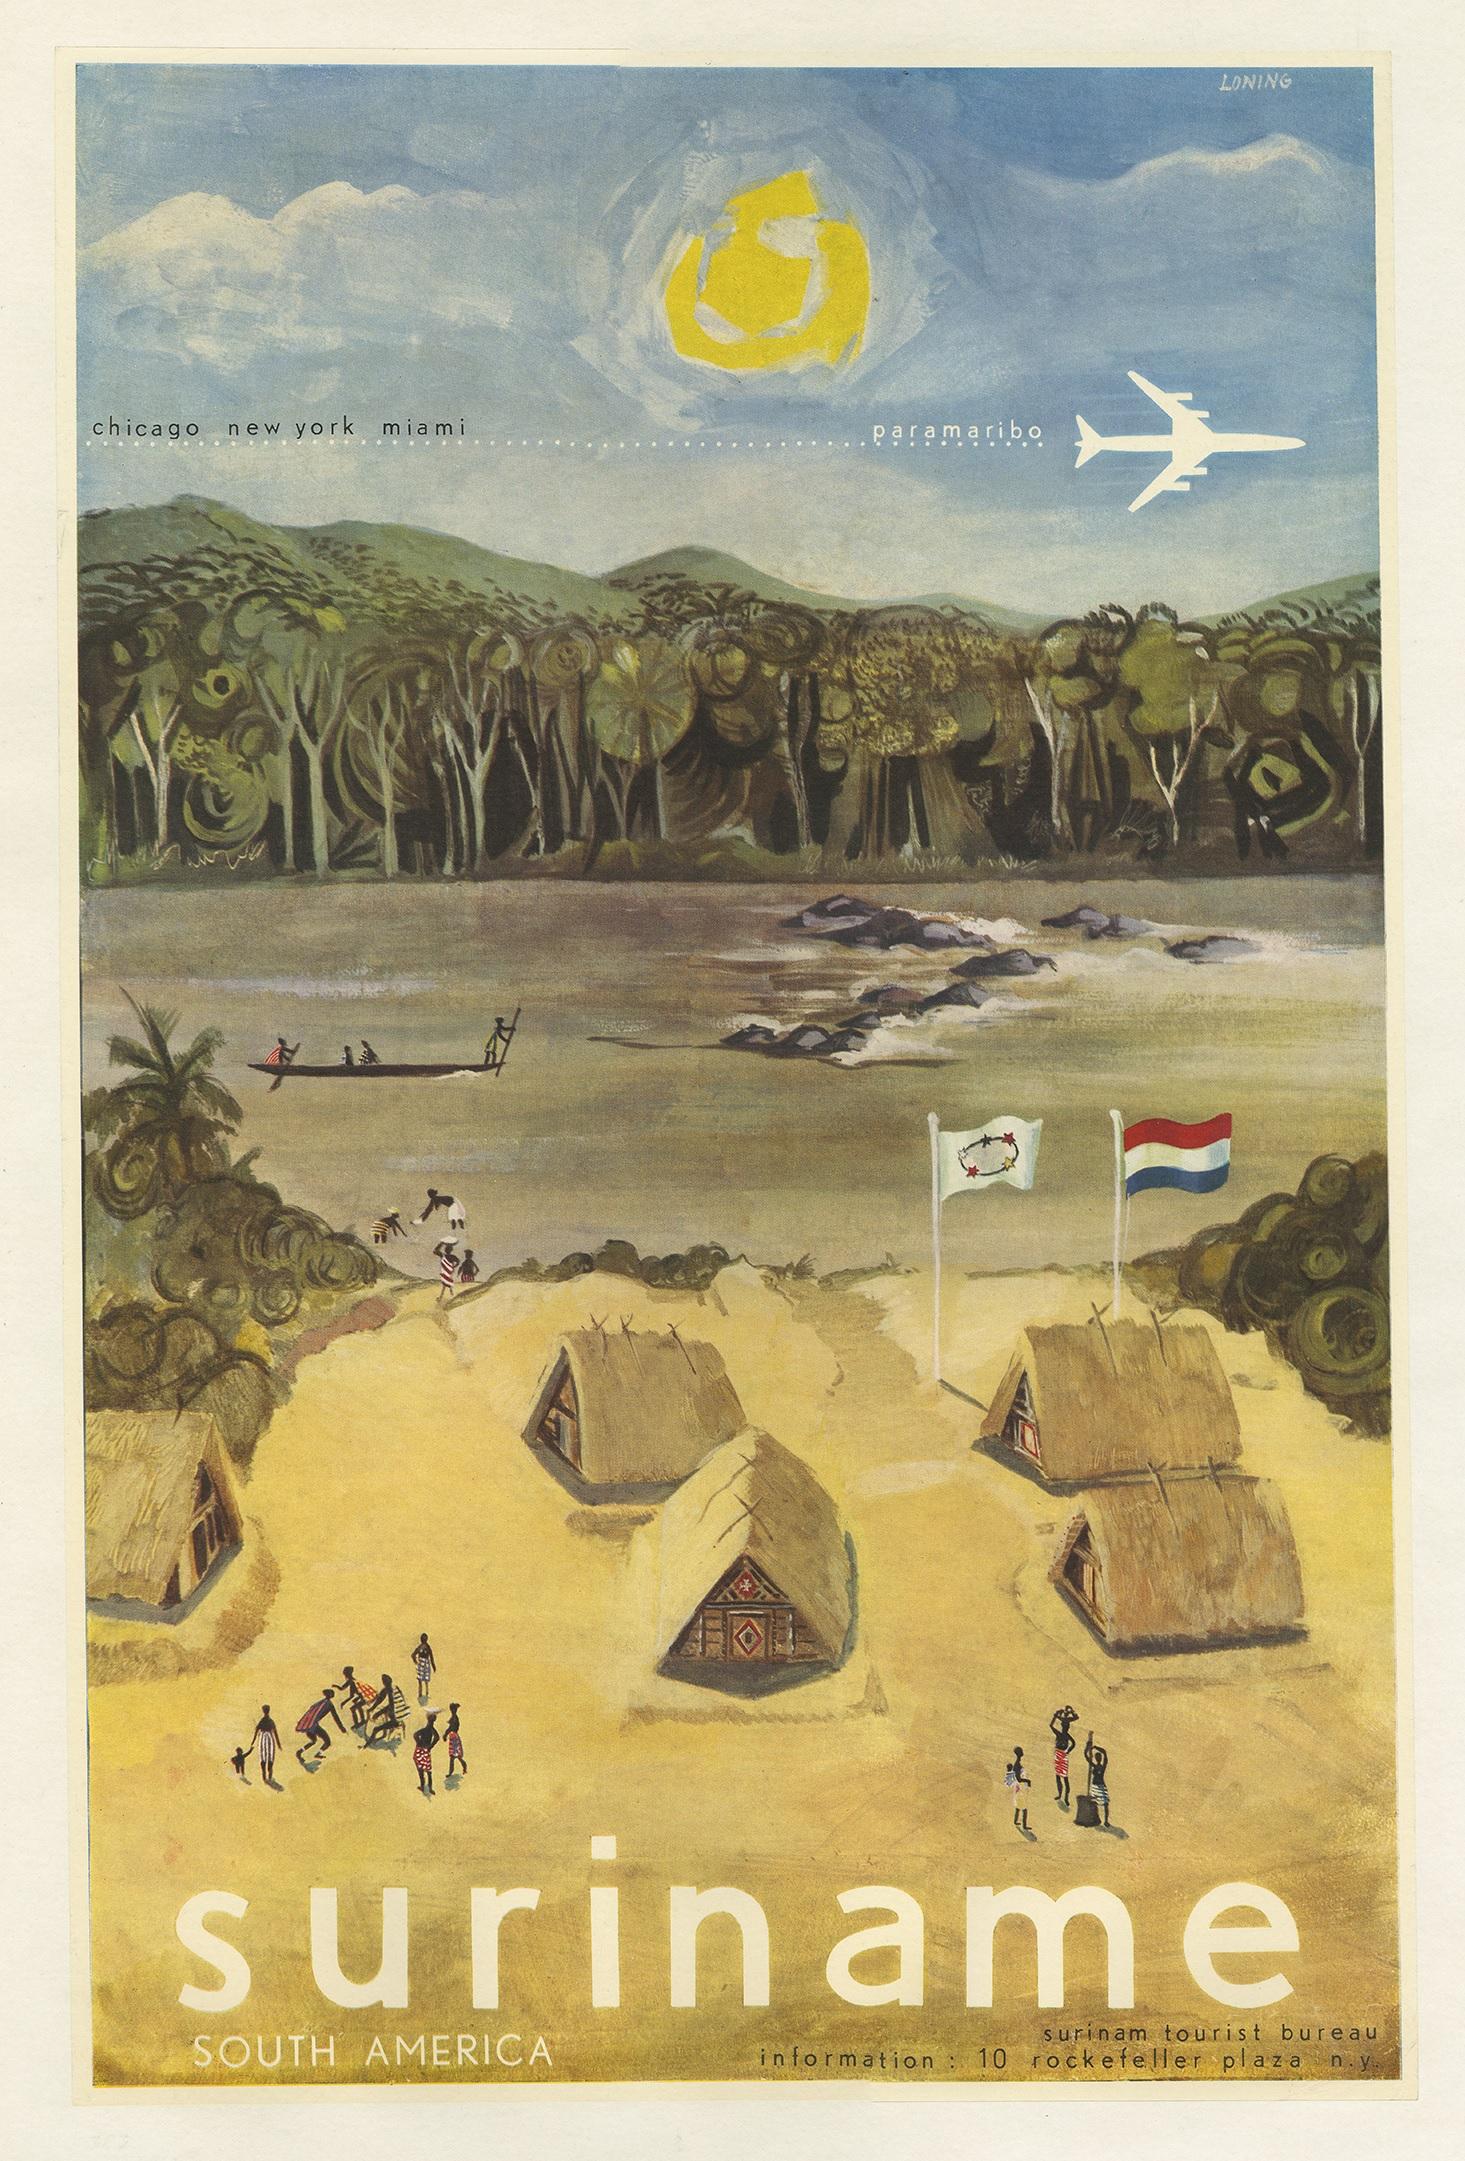 Vintage poster issued by the Suriname Tourist Bureau, circa 1950. It shows a village and a flight route 'Chicago, New York, Miami, Paramaribo' followed by an airplane. Linen backed.